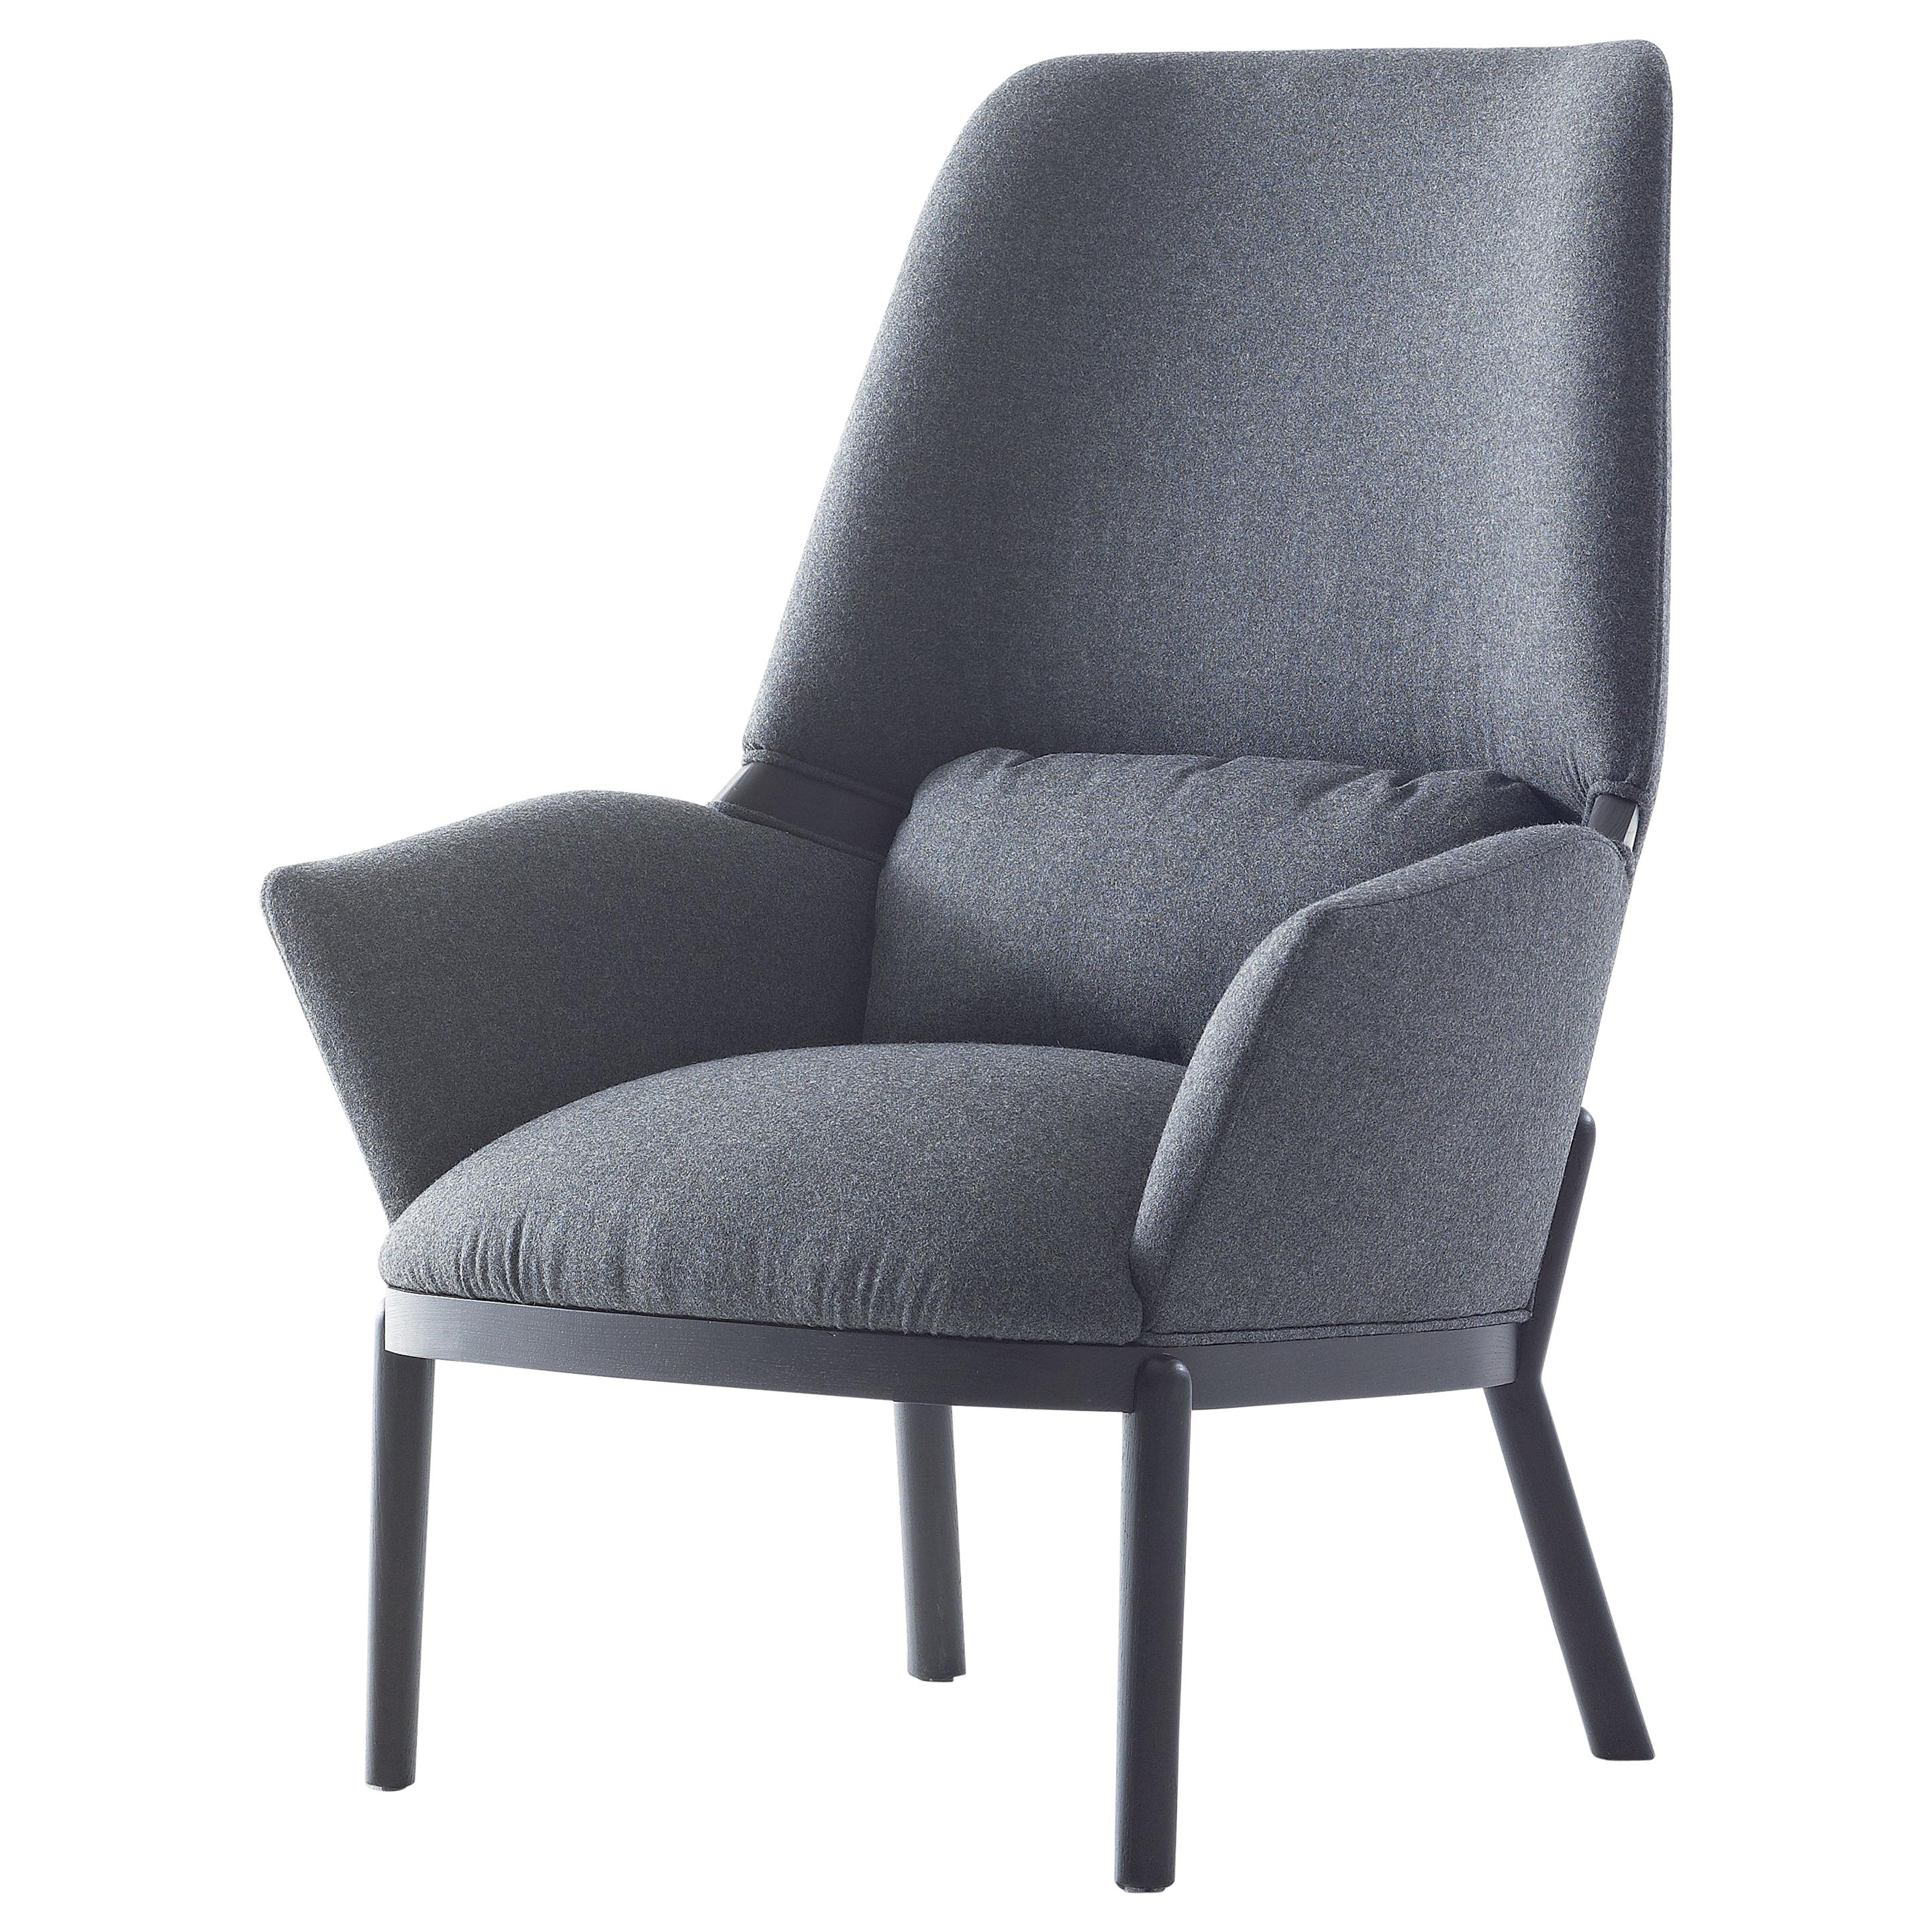 Arflex Serena Armchair in Lama Fabric with Wenge Stained Legs by Luca Nichetto For Sale